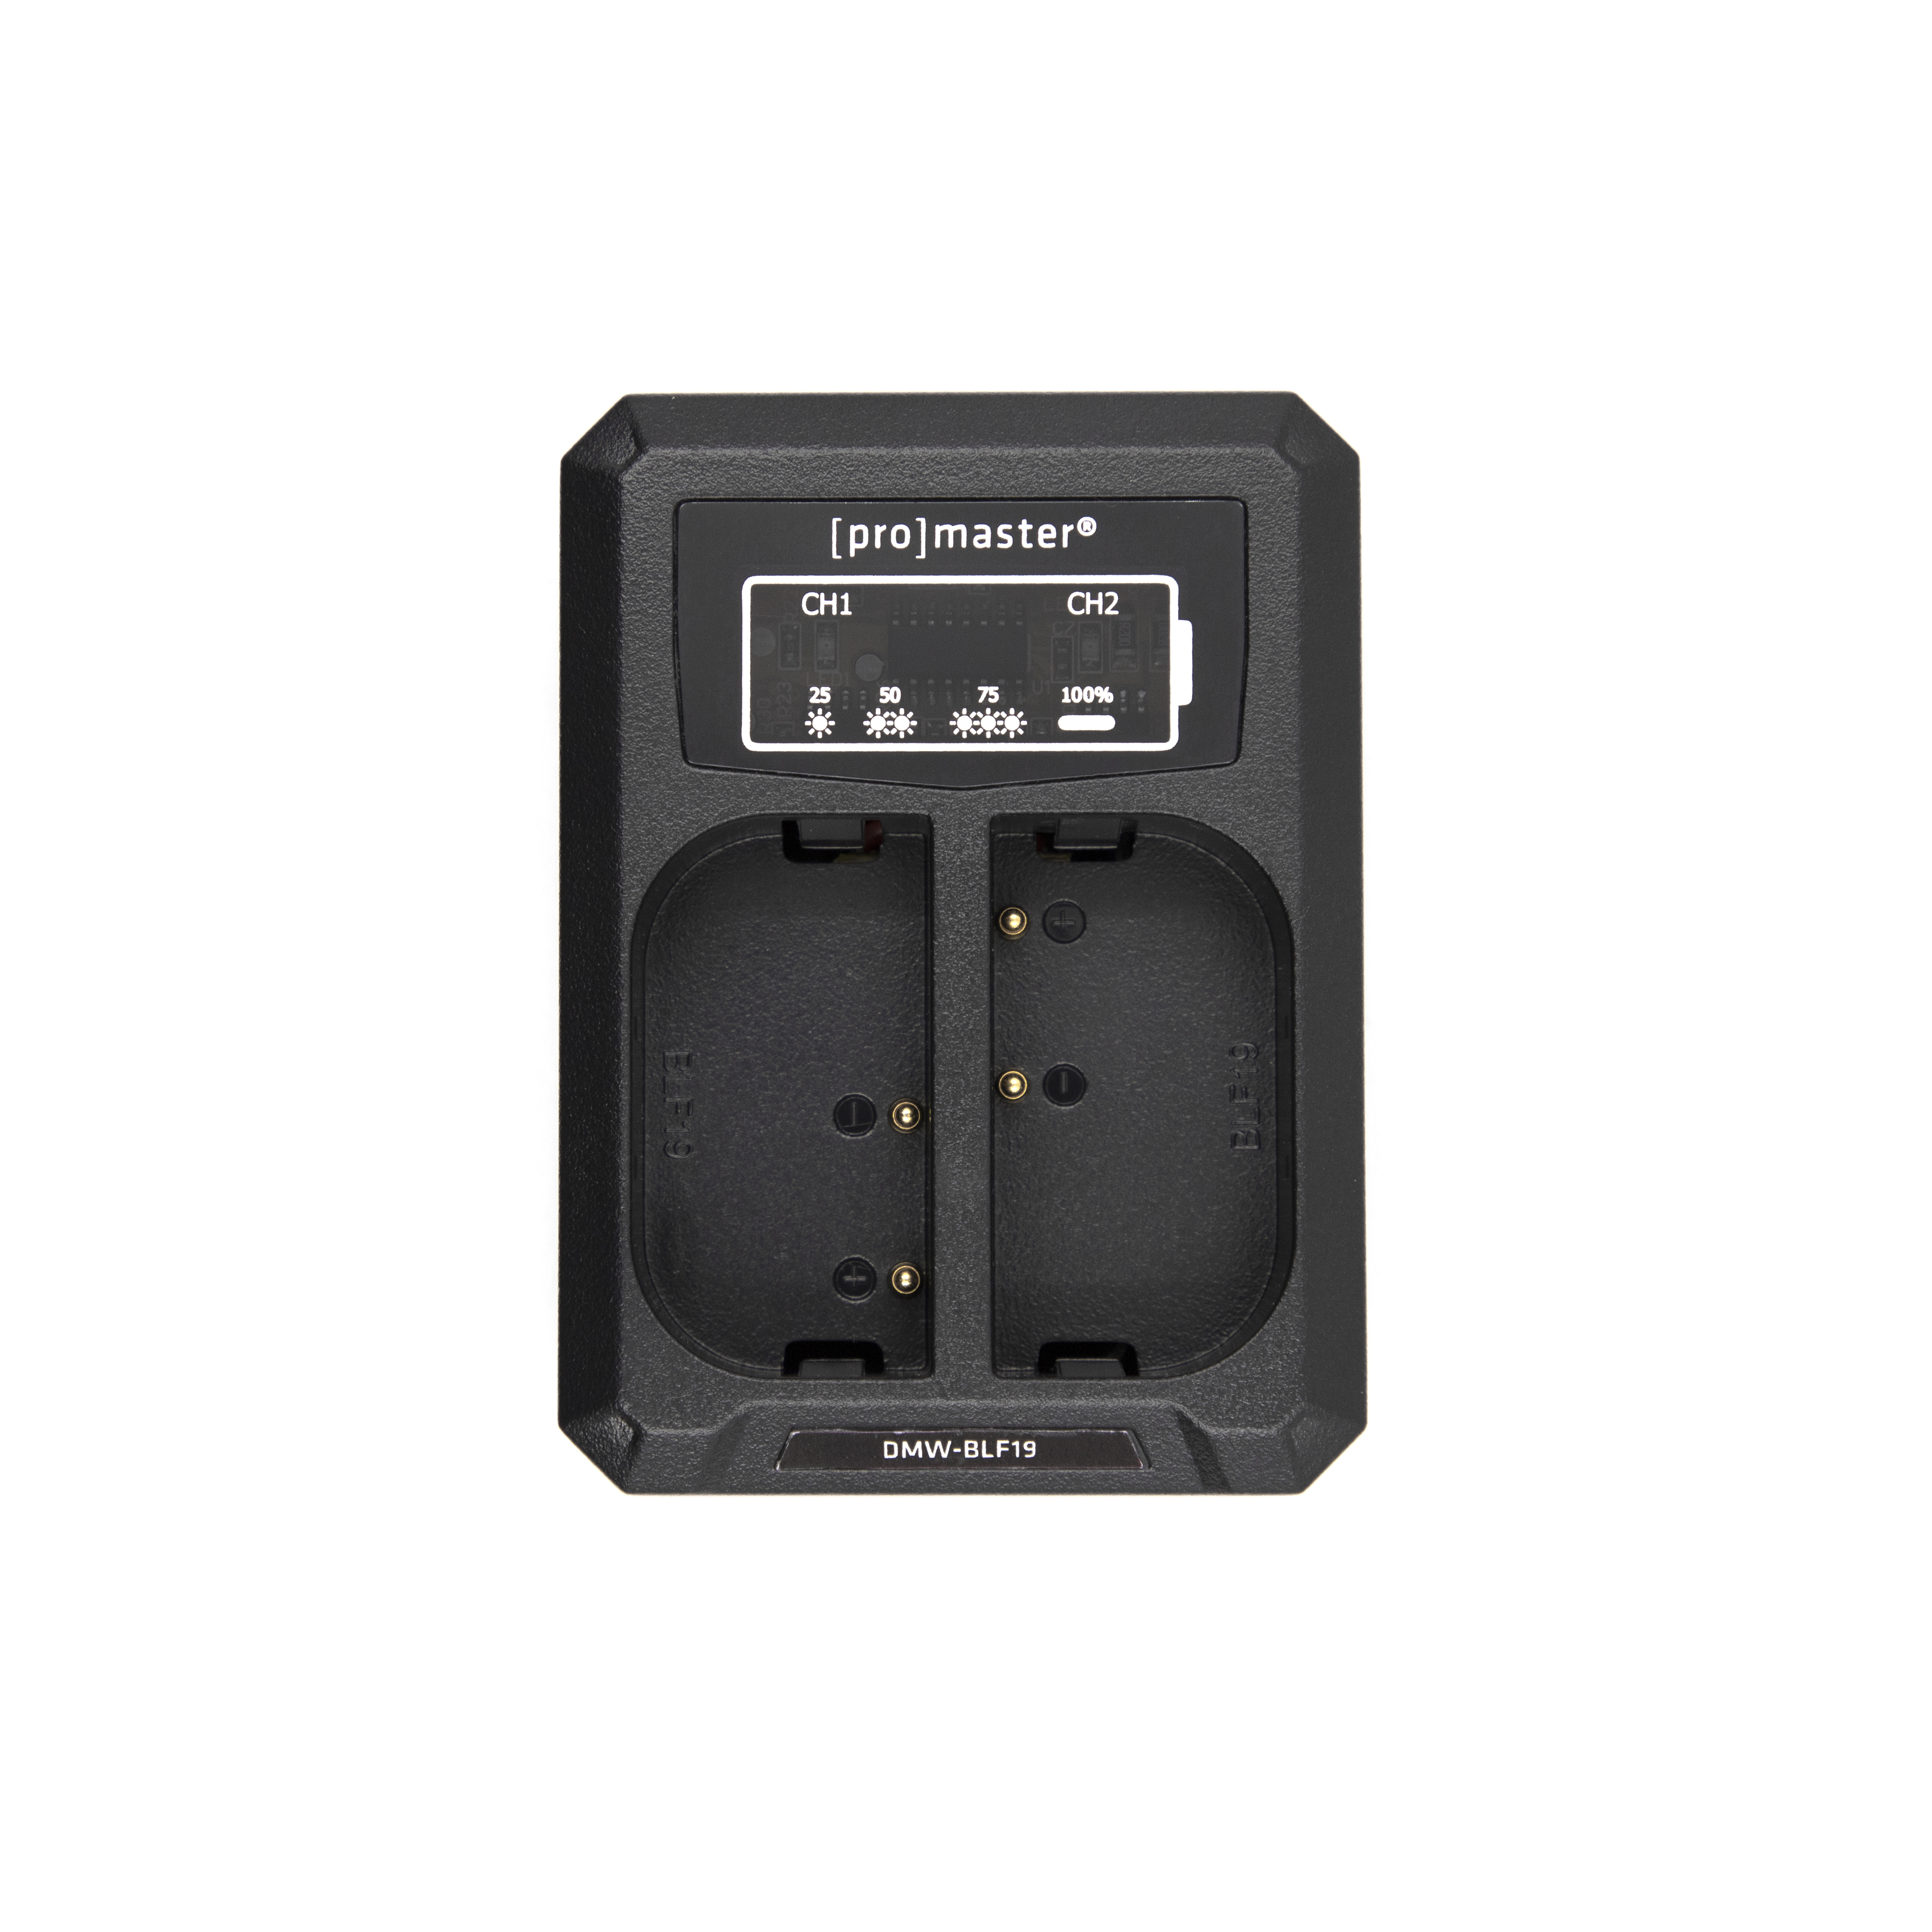 Promaster 4595 Dually Charger for Panasonic DMW-BLF19